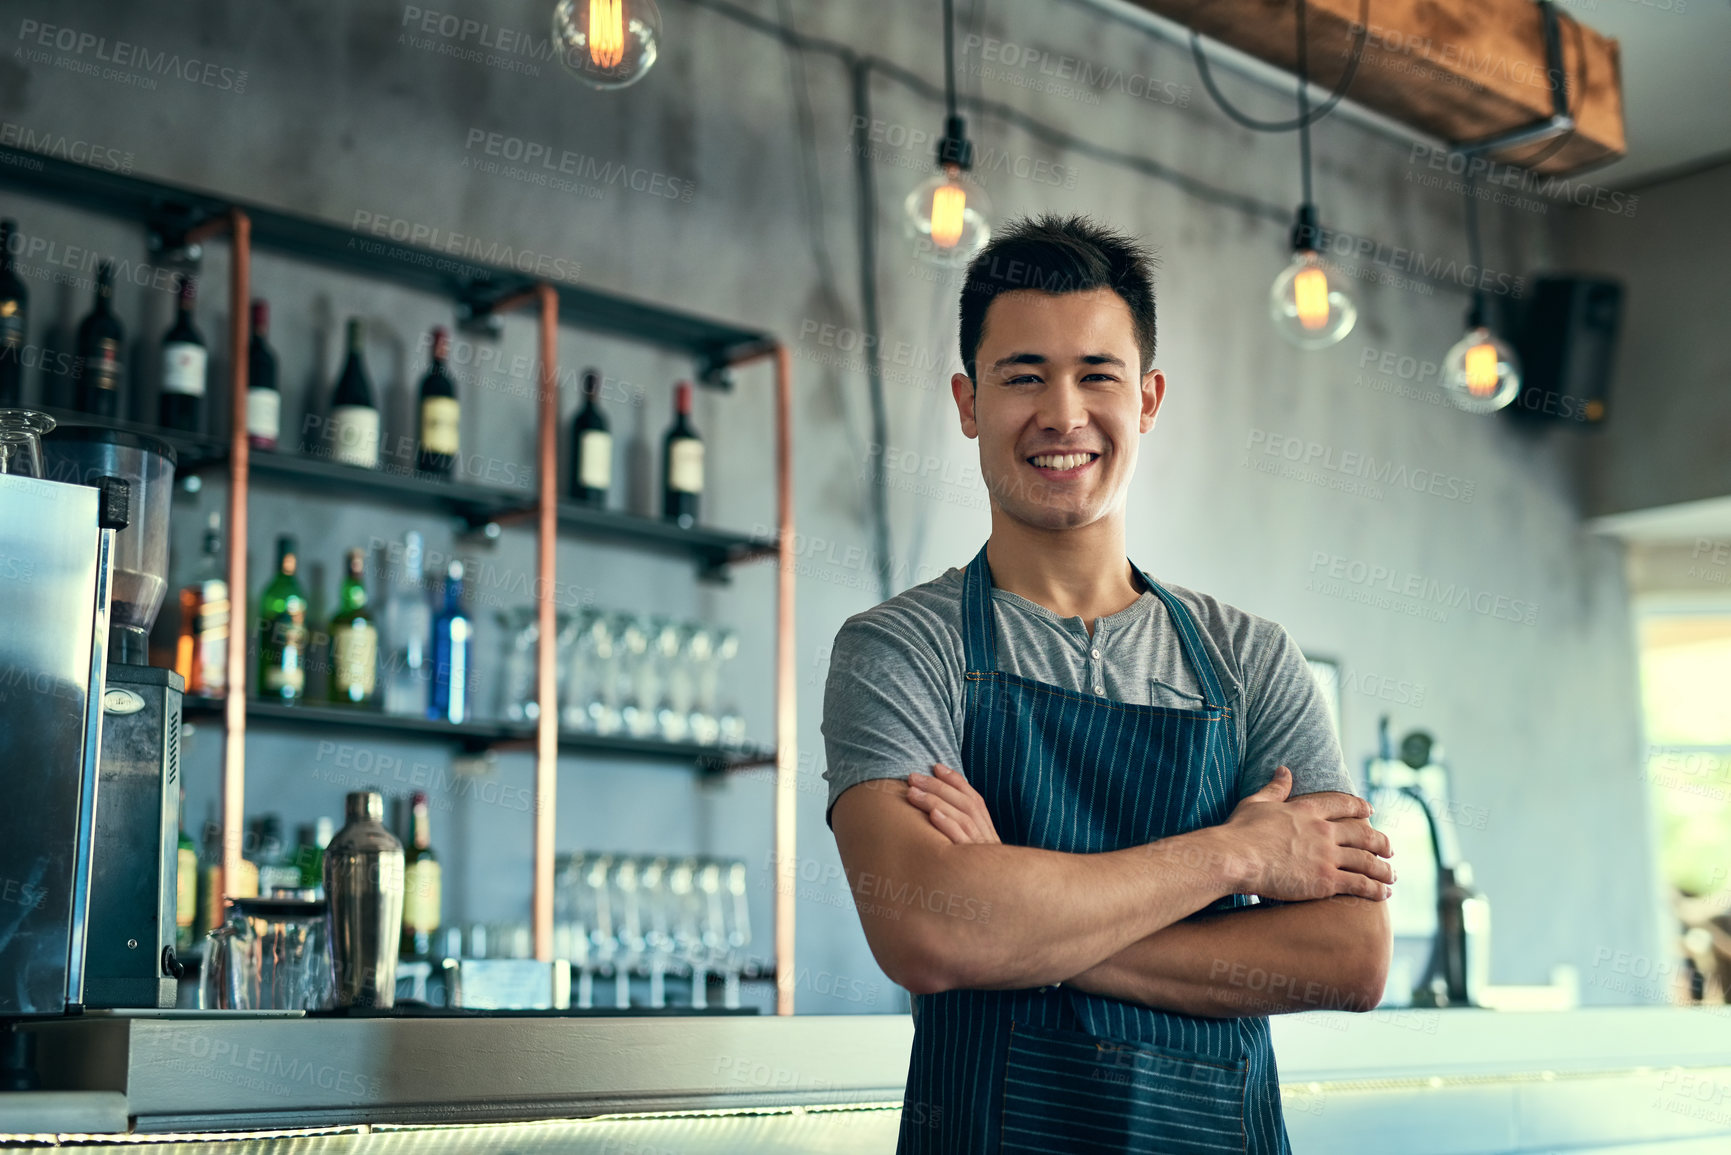 Buy stock photo Cropped portrait of a young man standing with his arms folded in his coffee shop